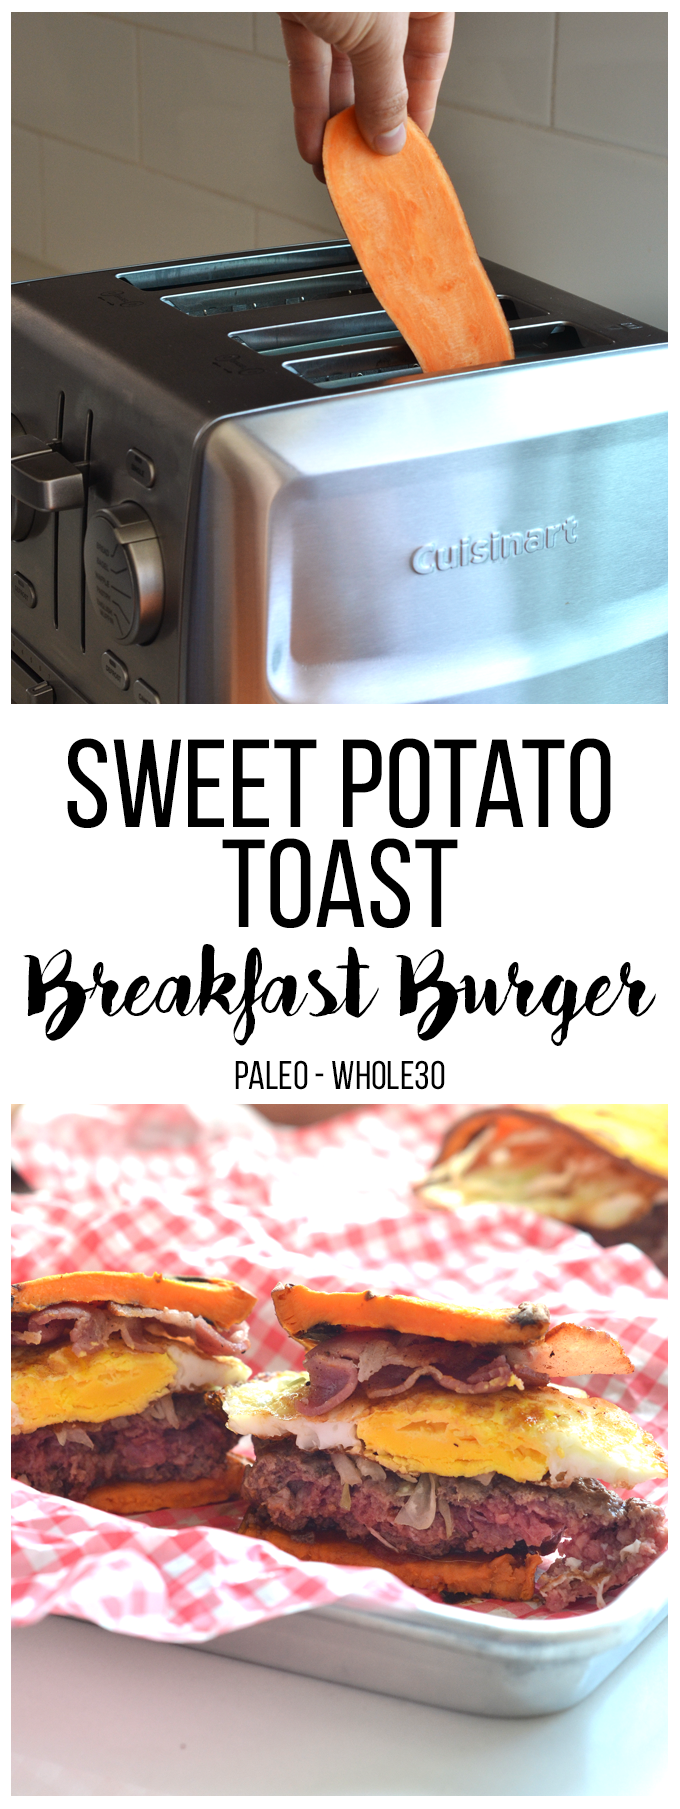 This Sweet Potato Toast Breakfast Burger is the perfect protein packed whole30 and paleo breakfast option!